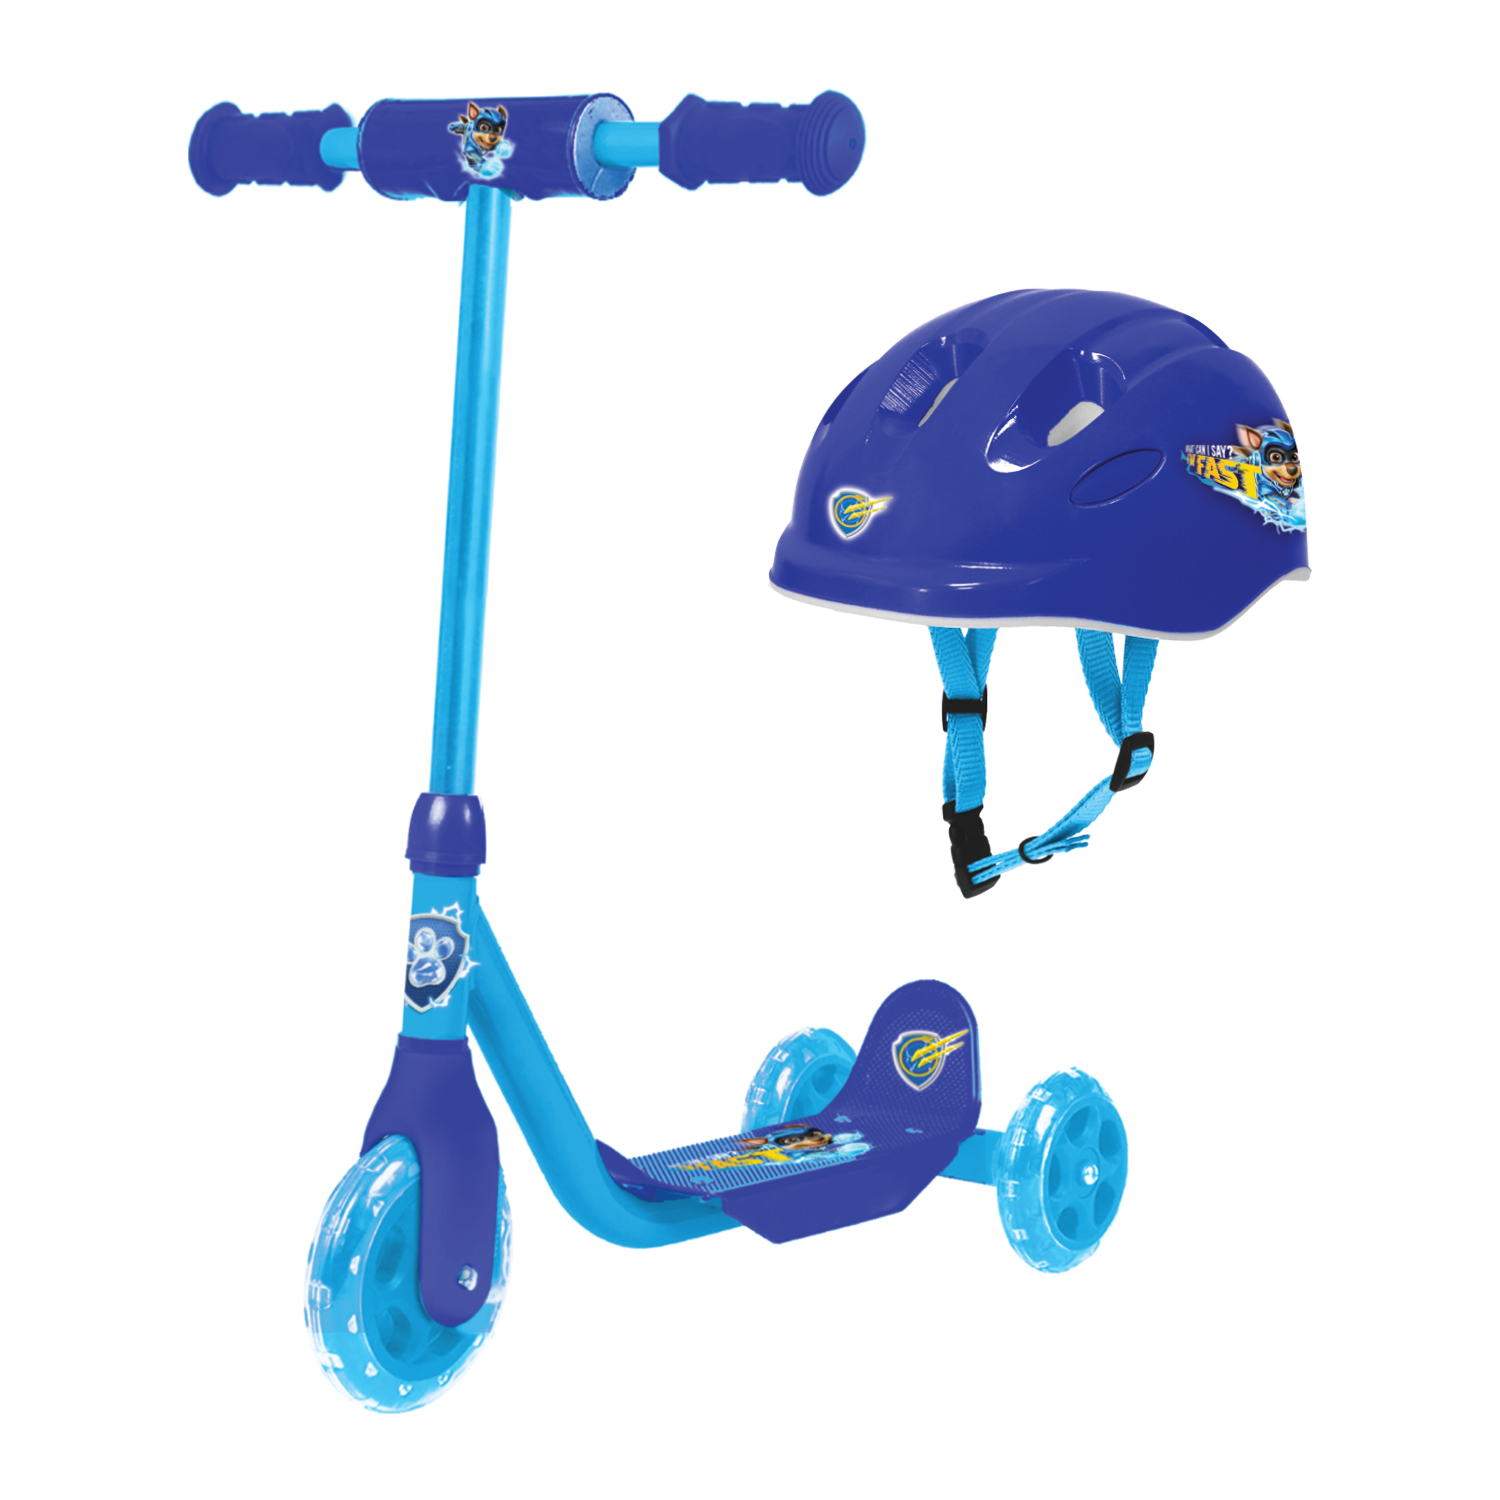 PAW Patrol The Mighty Movie Chase 3 Wheel Scooter & Helmet Set - Ages 2+ - 44 lbs - Unisex - Blue - image 1 of 7